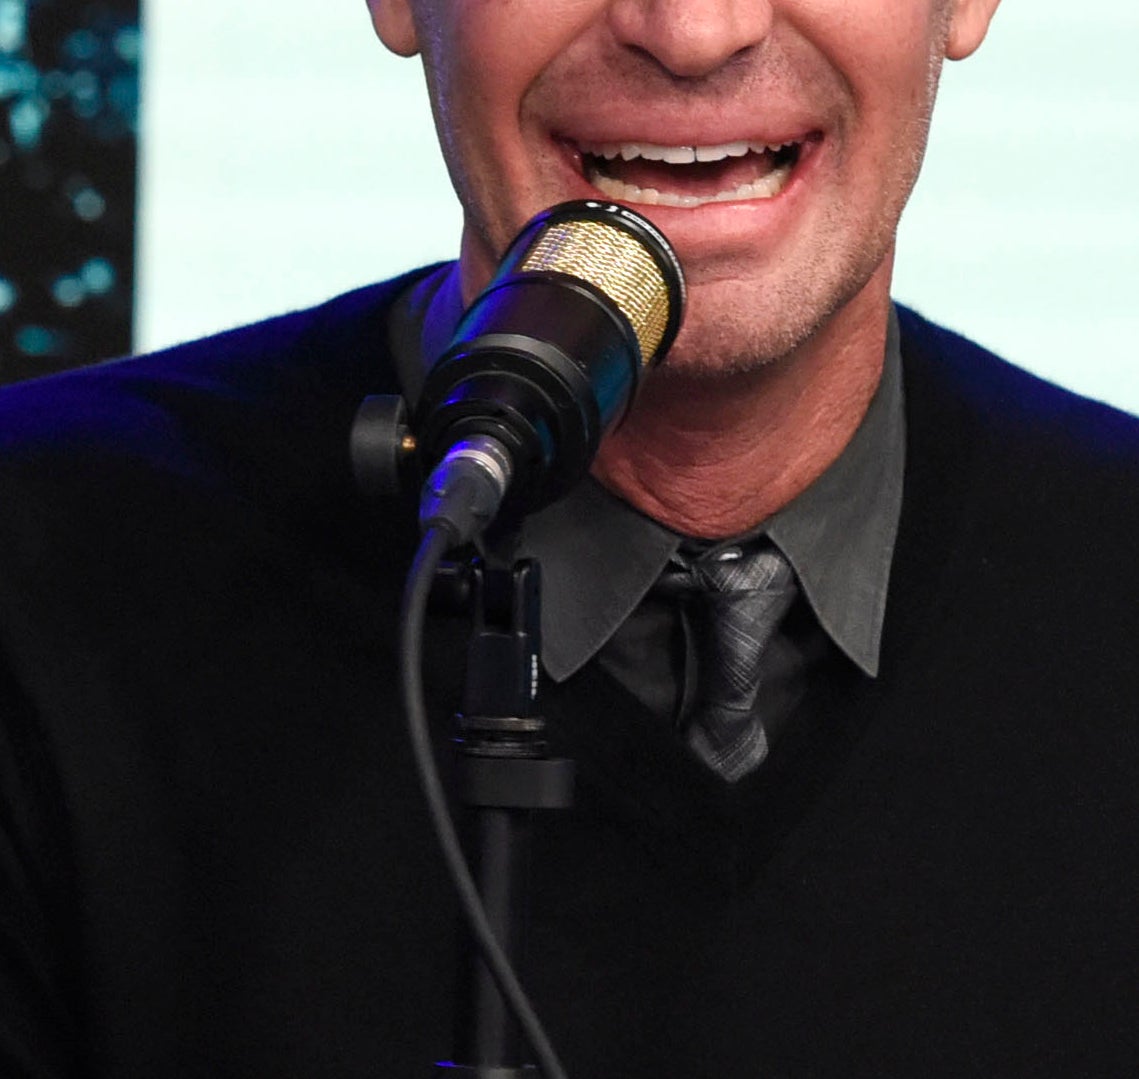 Jeff Lewis seated at a table speaking into a microphone, surrounded by Christmas-themed decorations